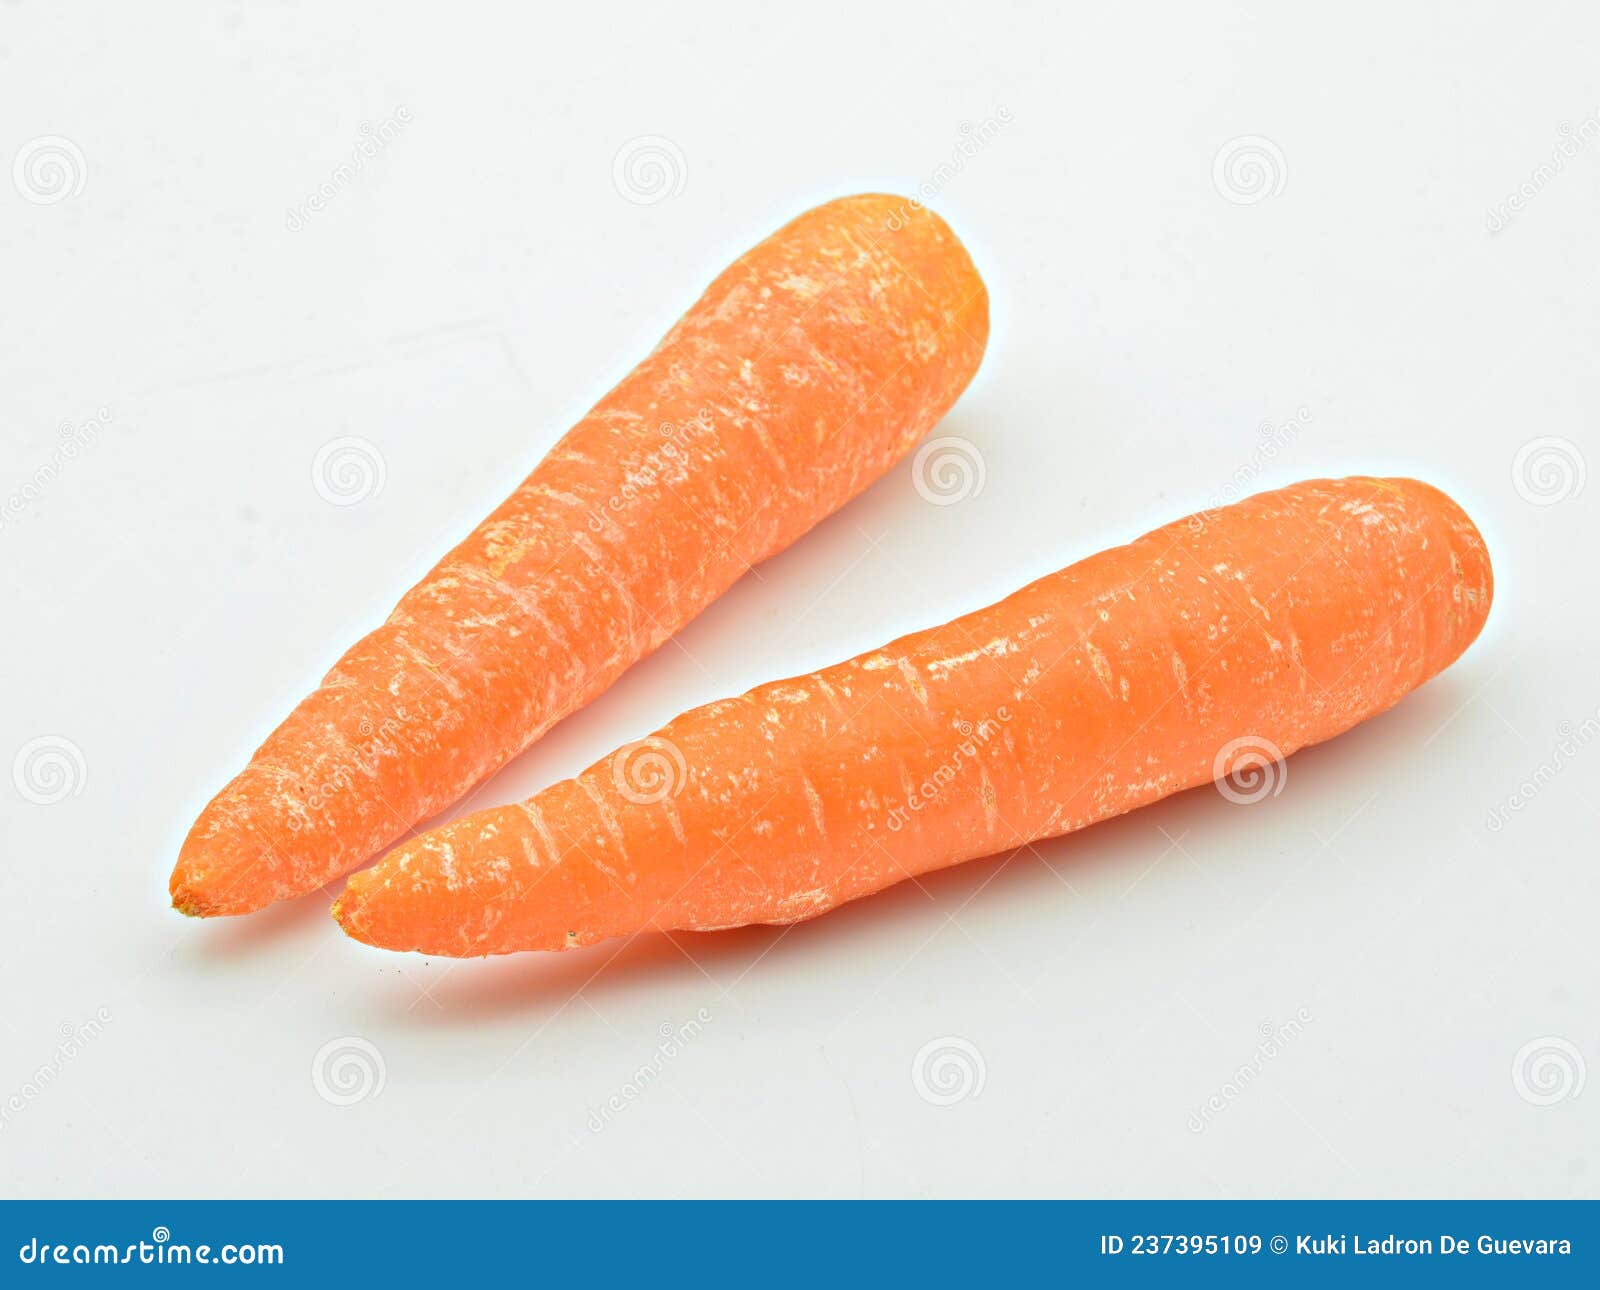 group of fresh carrots